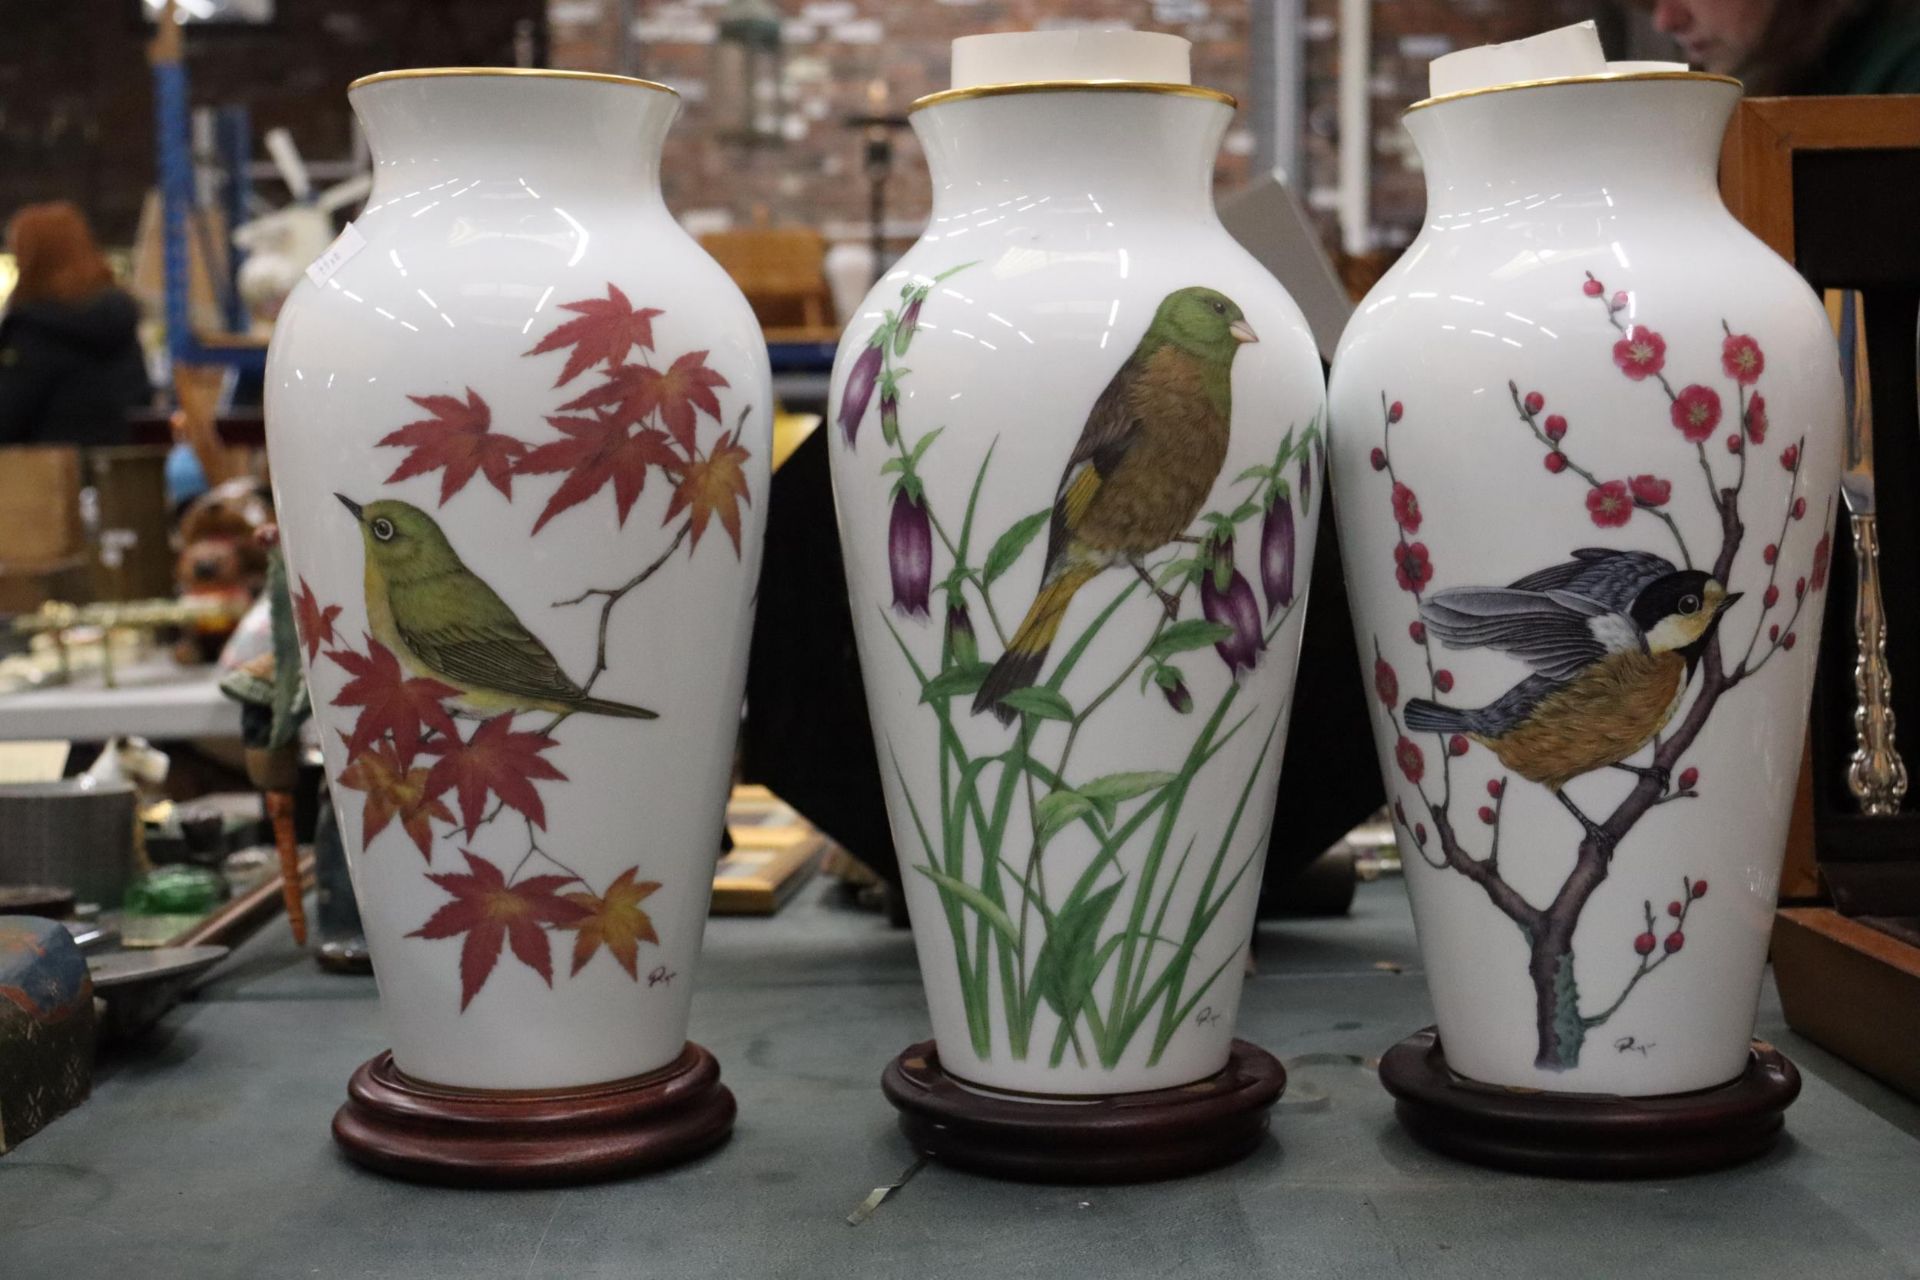 THREE LARGE FRANKLIN PORCELAIN VASES WITH JAPANESE CHARACTERS TO BASE AND WOODEN STANDS, THE HERALDS - Image 7 of 7